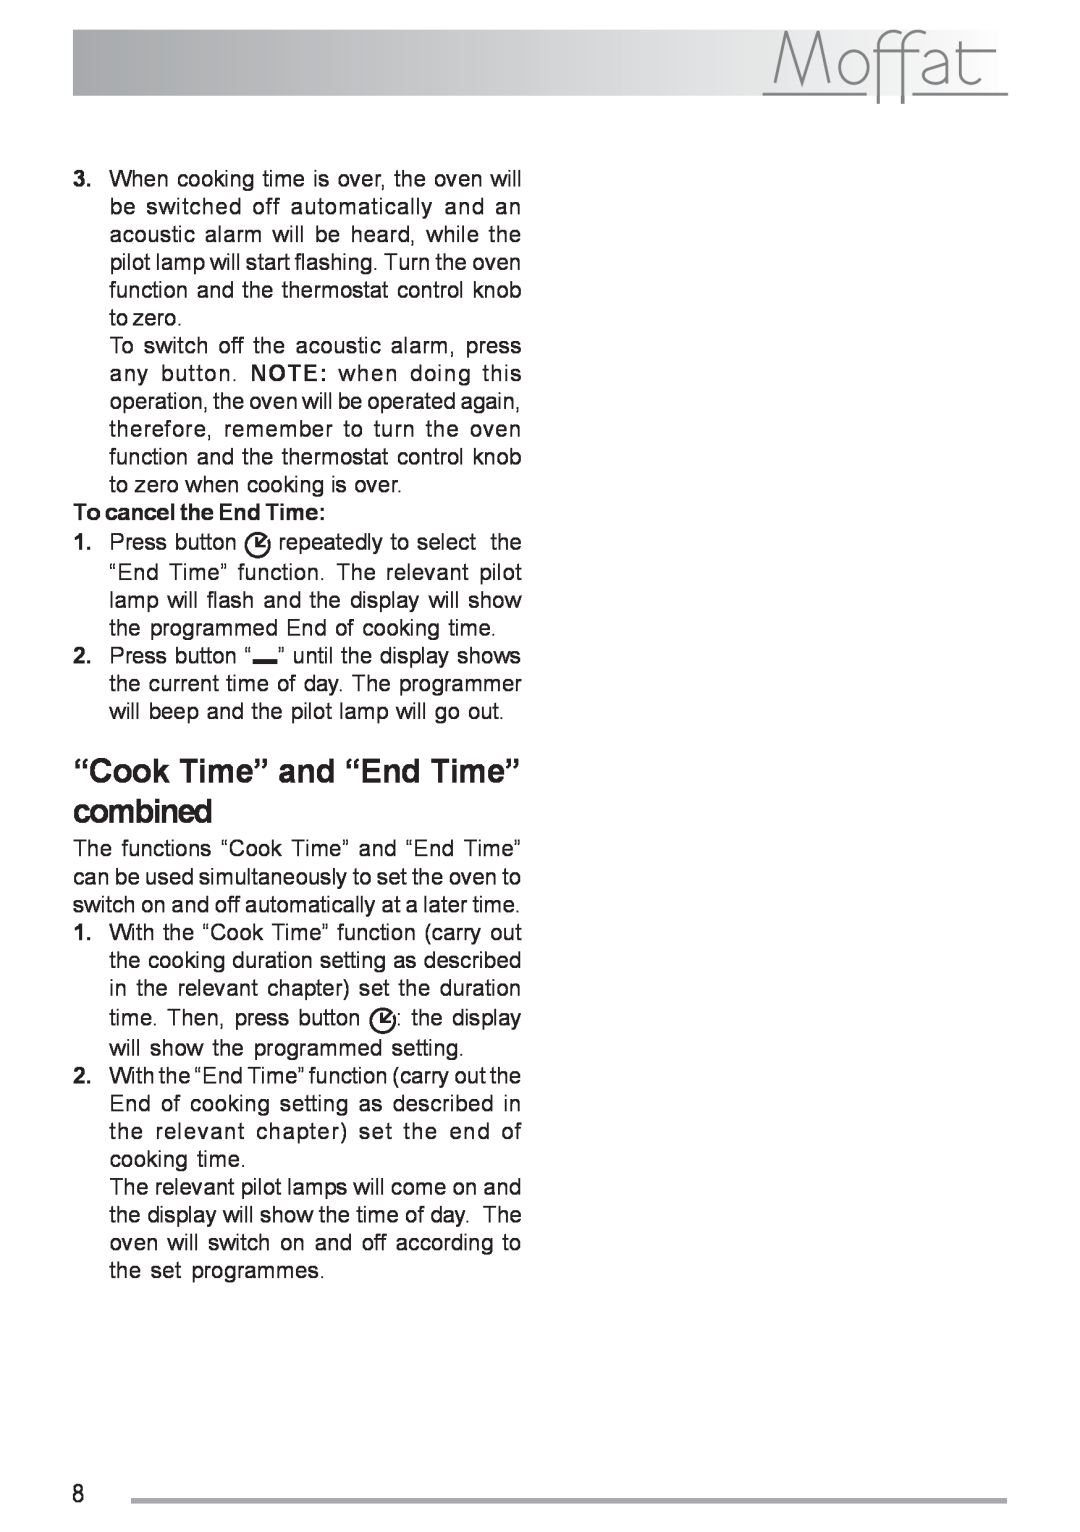 Moffat MSF 616 manual “Cook Time” and “End Time” combined, To cancel the End Time 